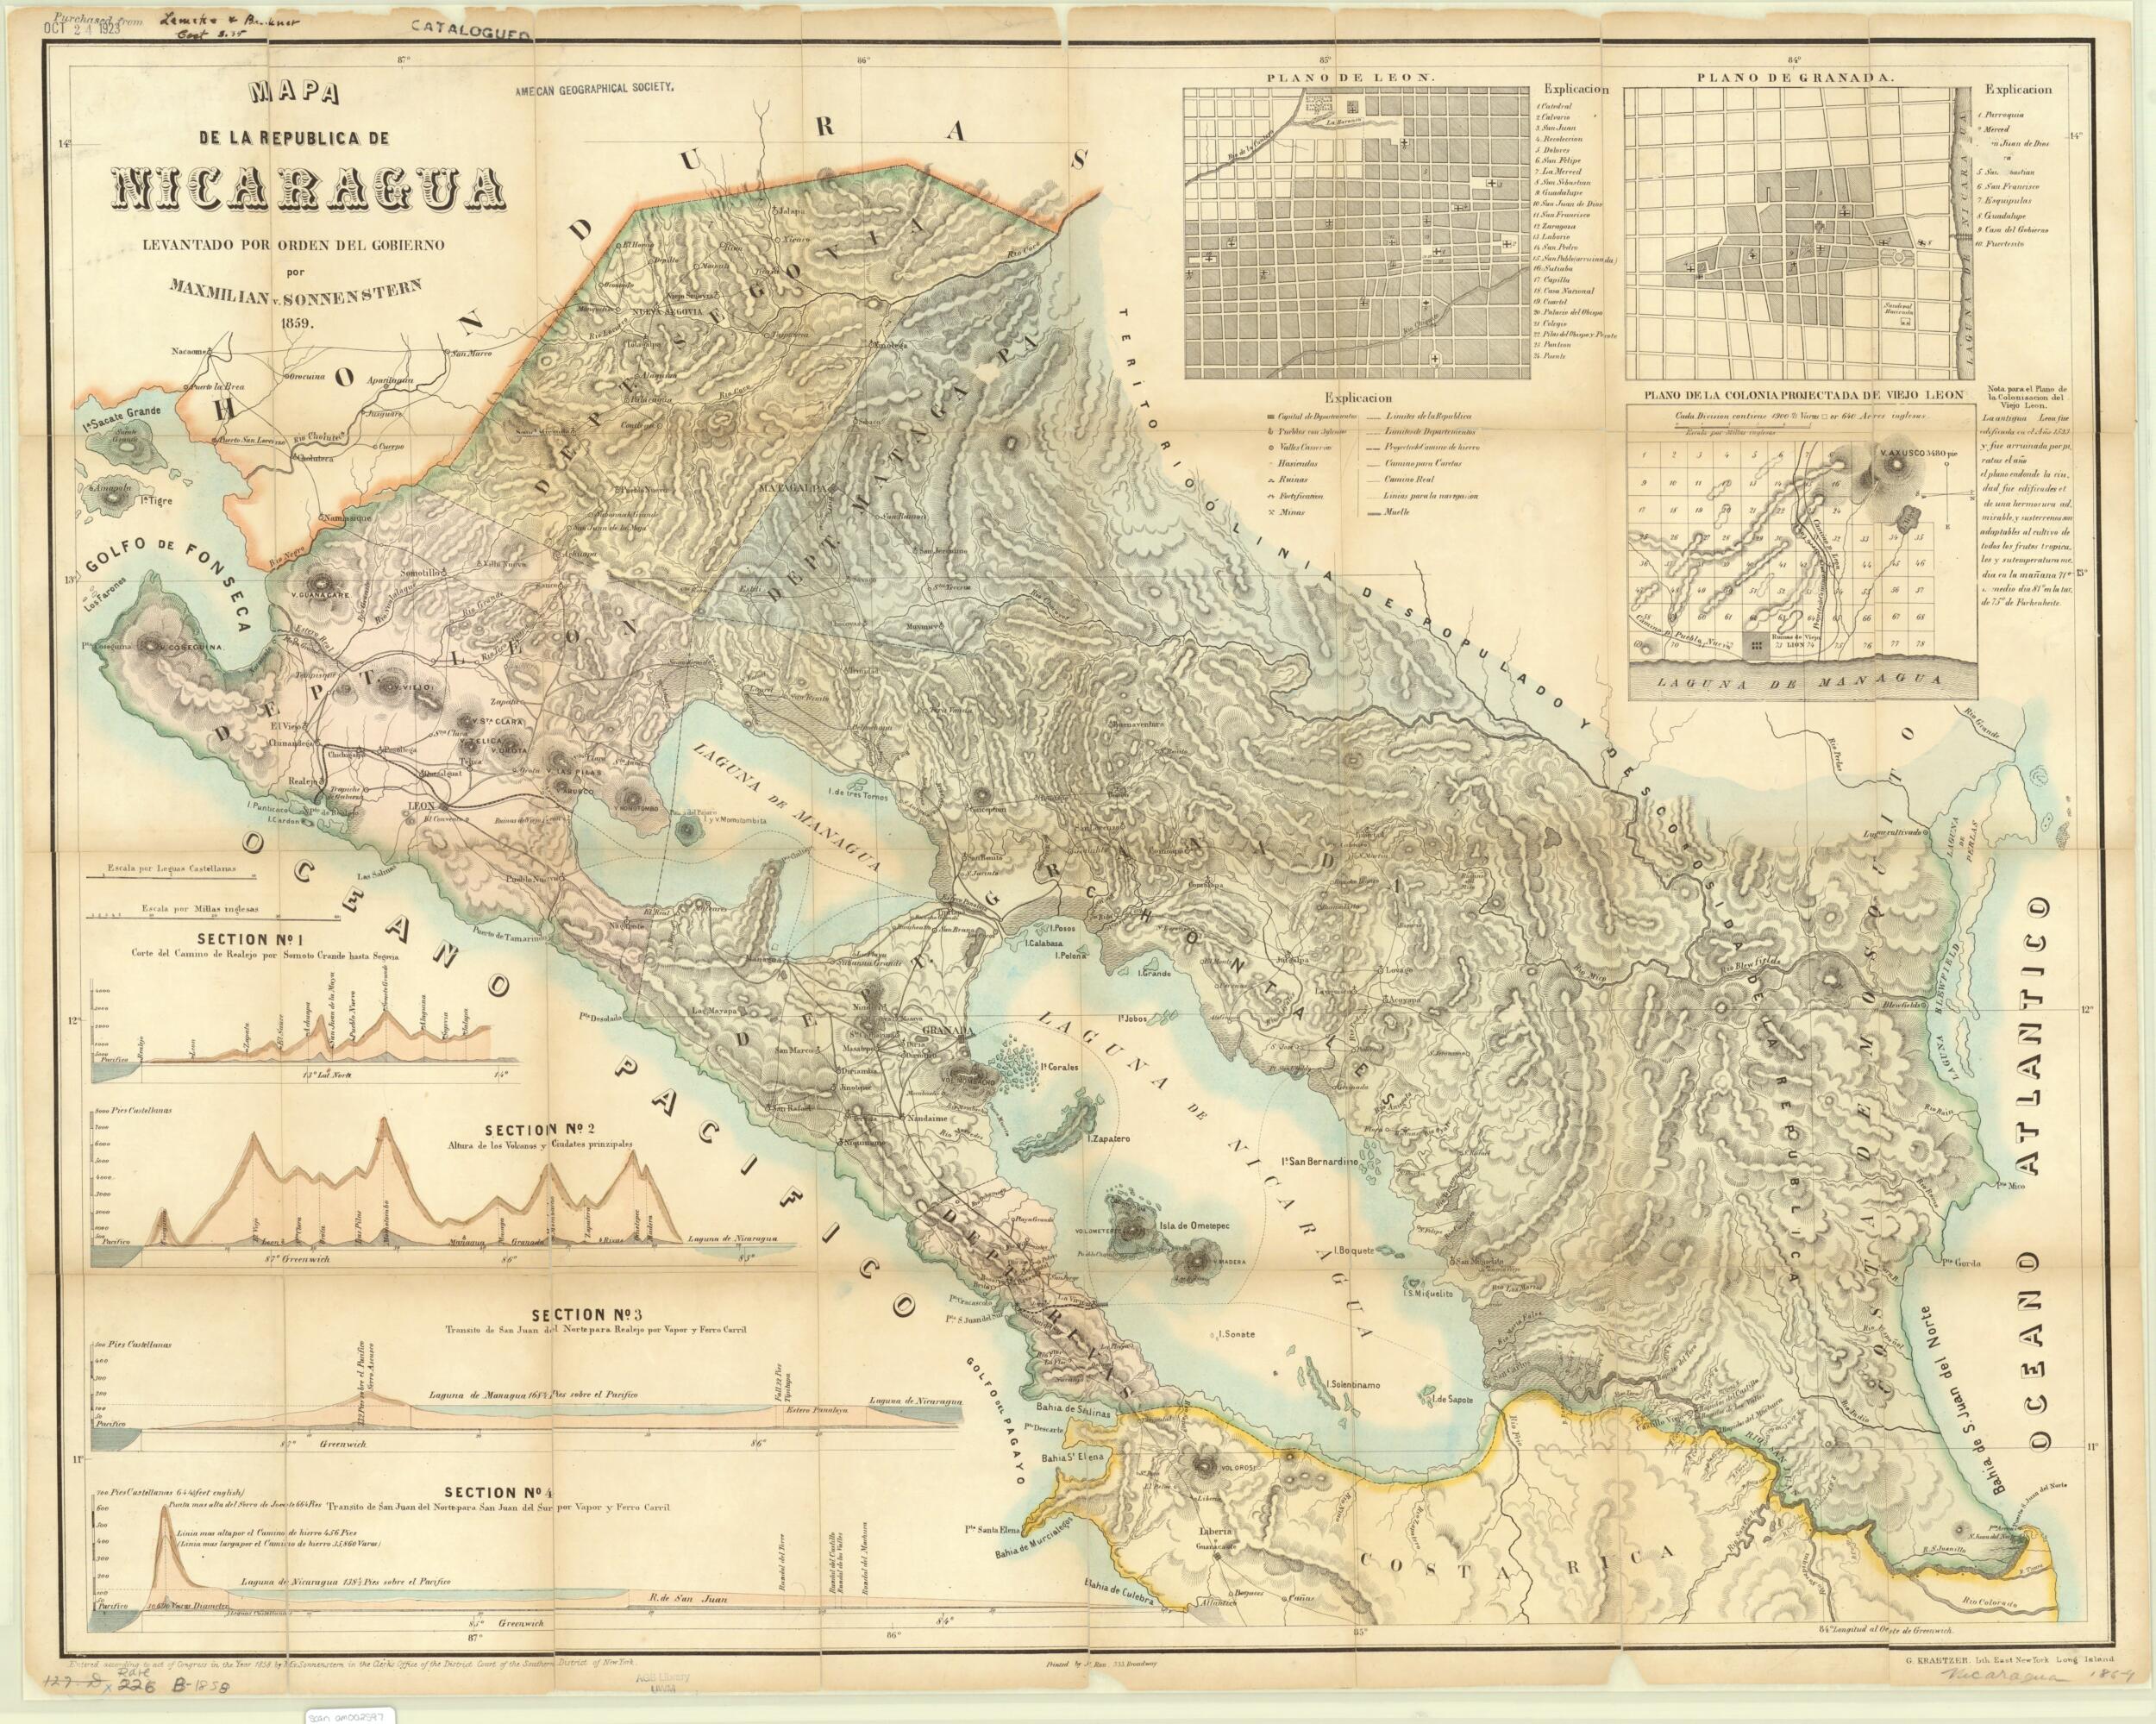 This old map of General Map of the Republic of Nicaragua, from 1858. (Mapa General De La Republica Nicaragua) was created by G. Kraetzer, J. Rau, Maximilian Von Sonnenstern in 1858